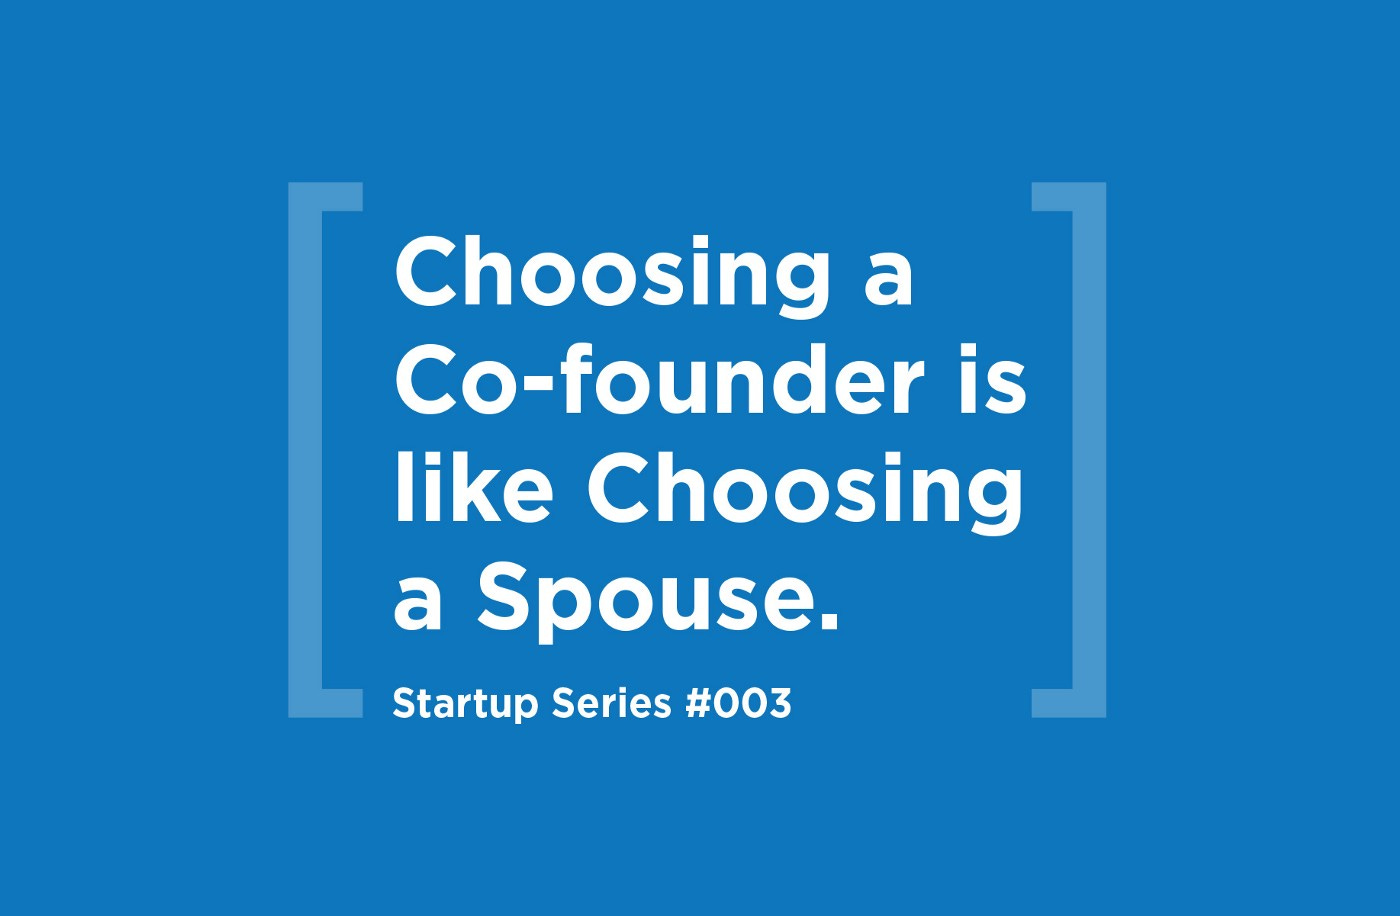 Startup Series #003 — Choosing a Co-founder is like Choosing a Spouse.